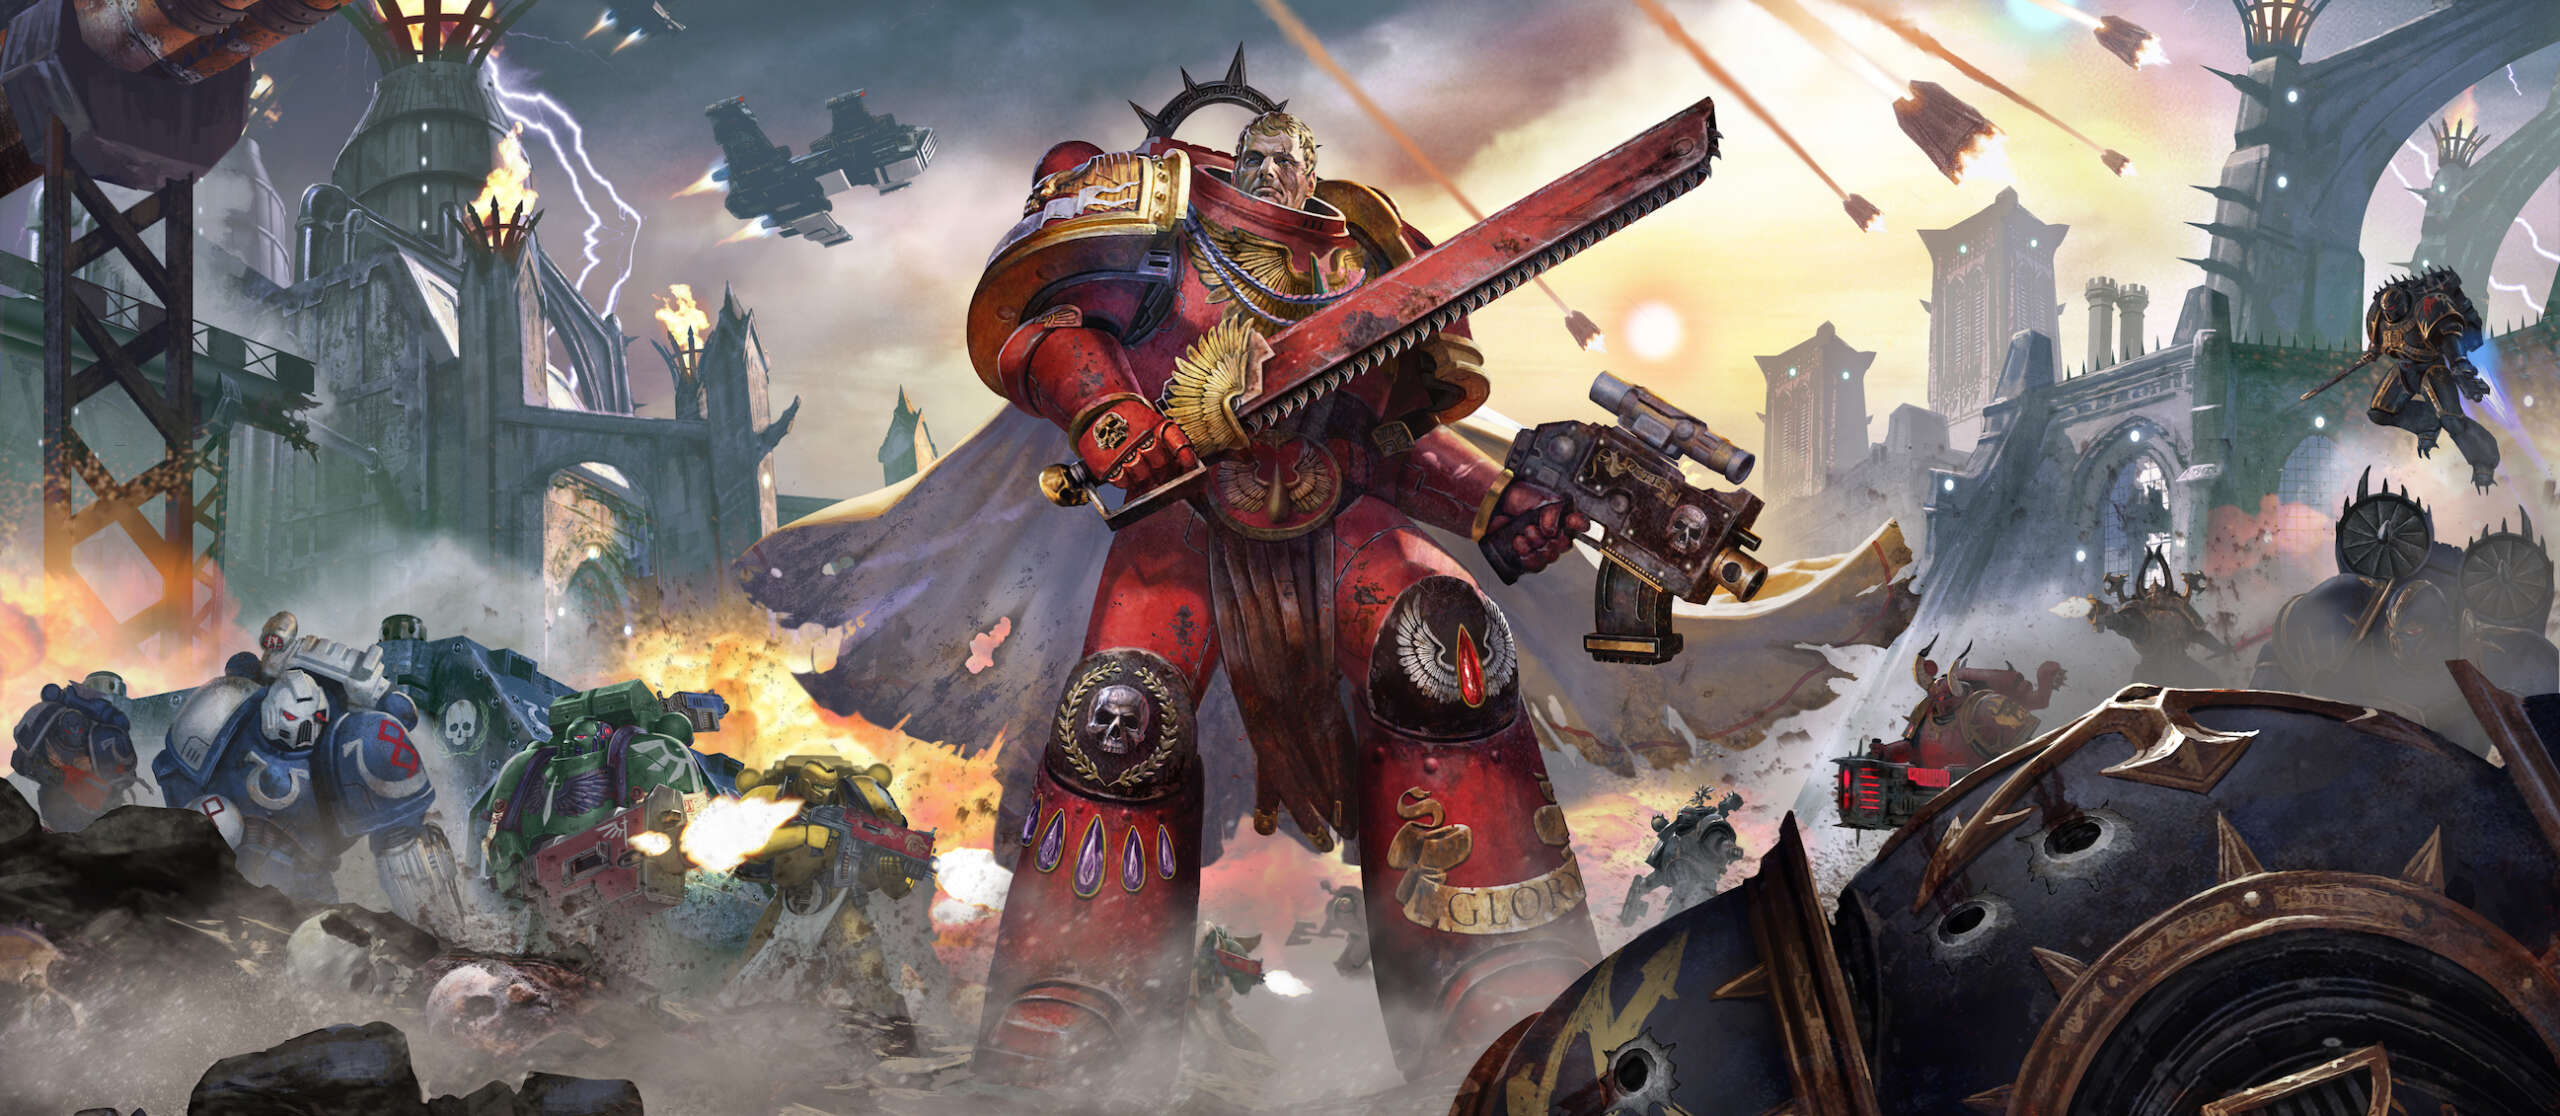 A Warhammer 40K Space Marine standing on a battlefield holding a chainsword and bolt pistol.